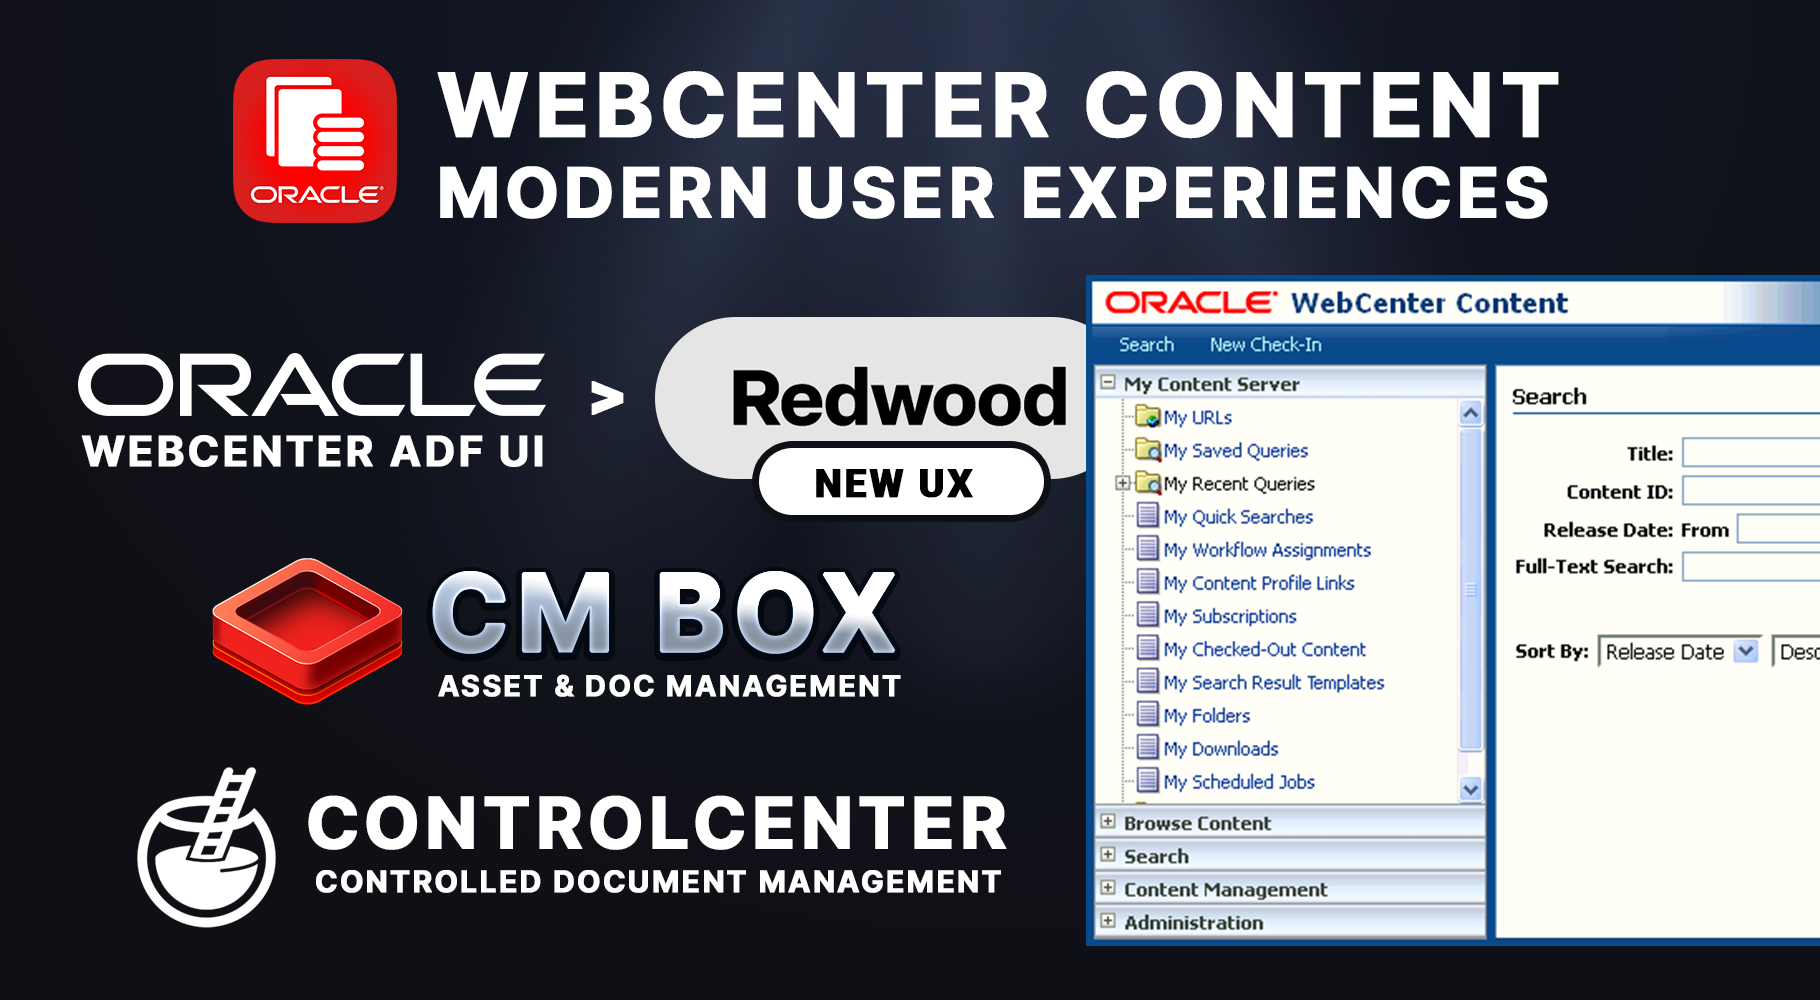 Oracle WebCenter Content Facelift & Improved UX